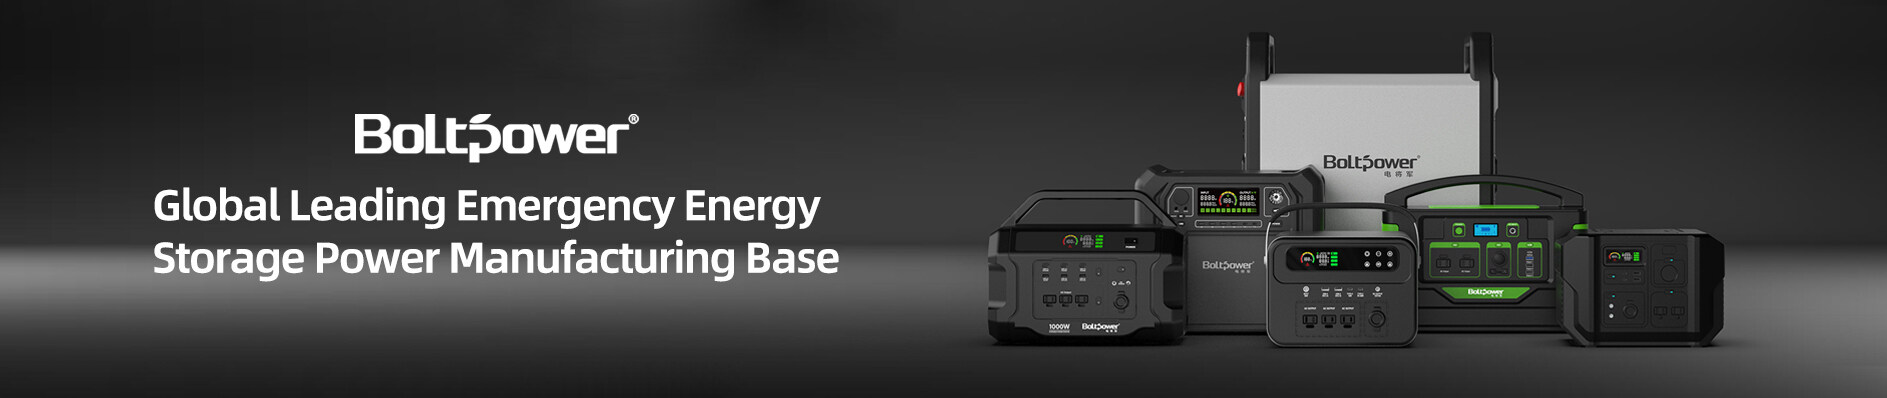 portable power station with lifepo4 battery, portable power station 1000 watts, power station 1000